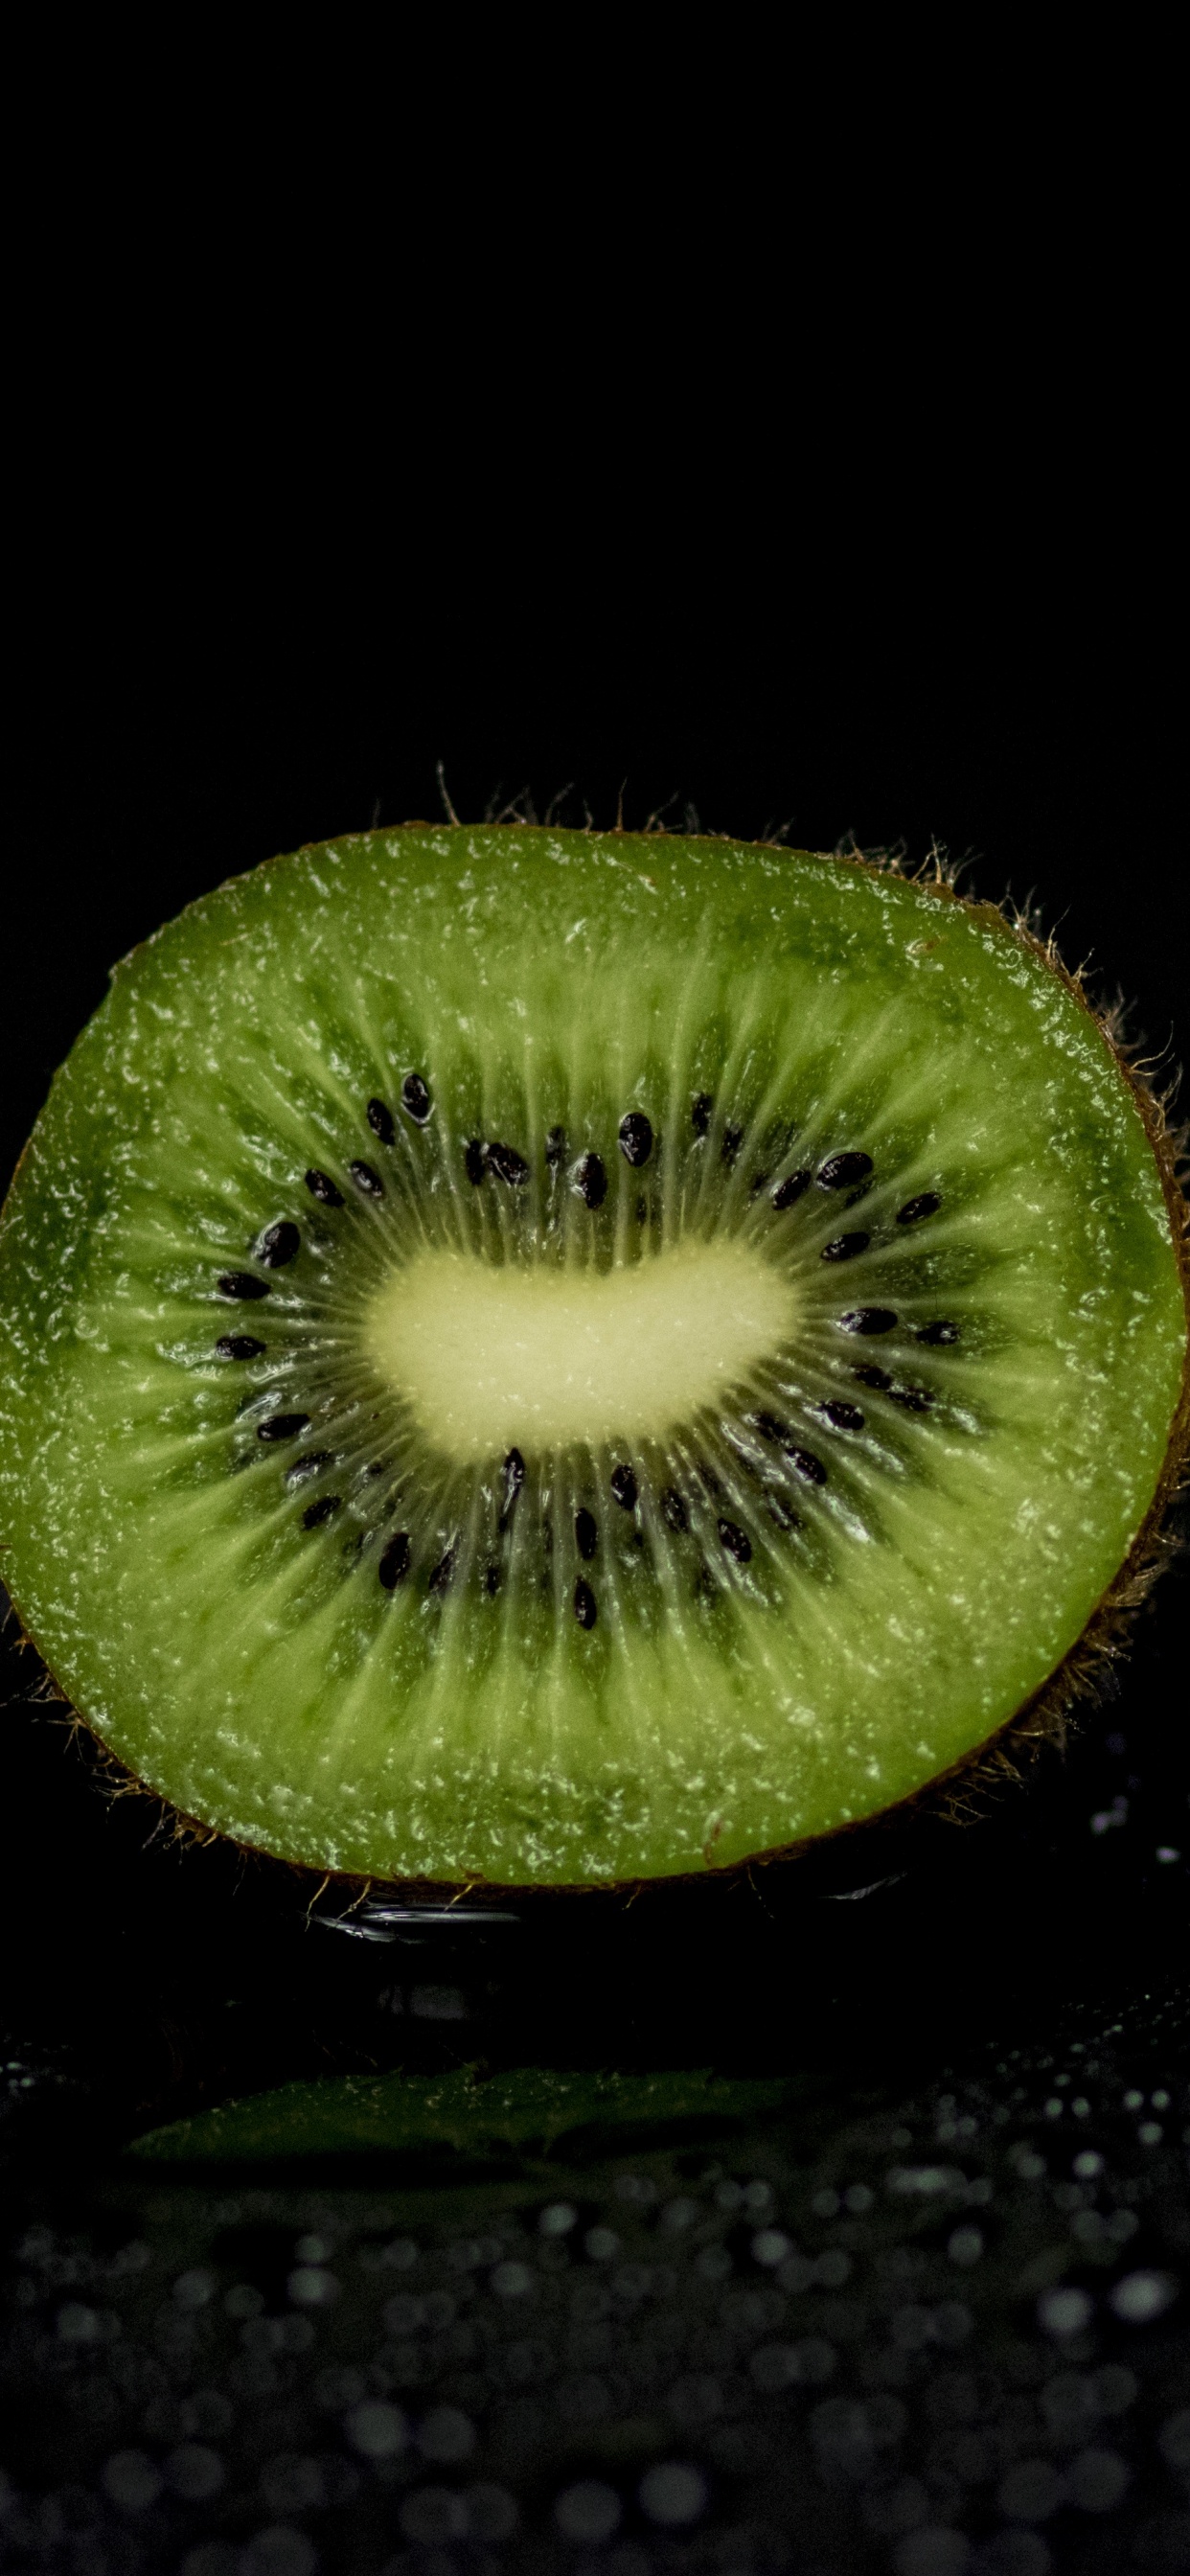 Green Round Fruit on Black Surface. Wallpaper in 1242x2688 Resolution